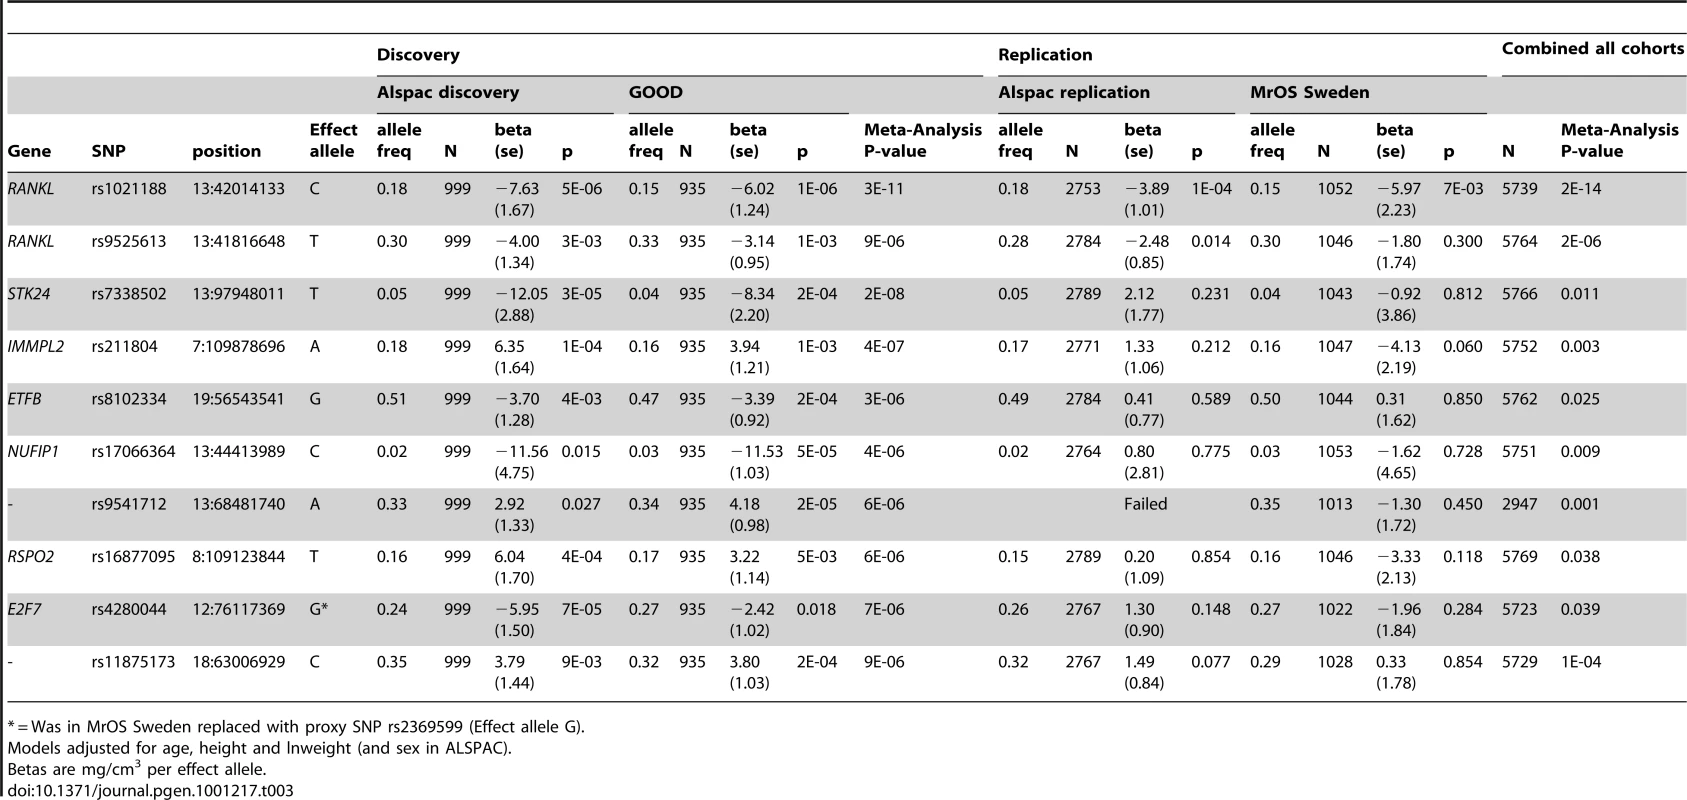 Top cortical BMD GWAS meta-analysis hits, with replication and meta-analysis results of all four cohorts.